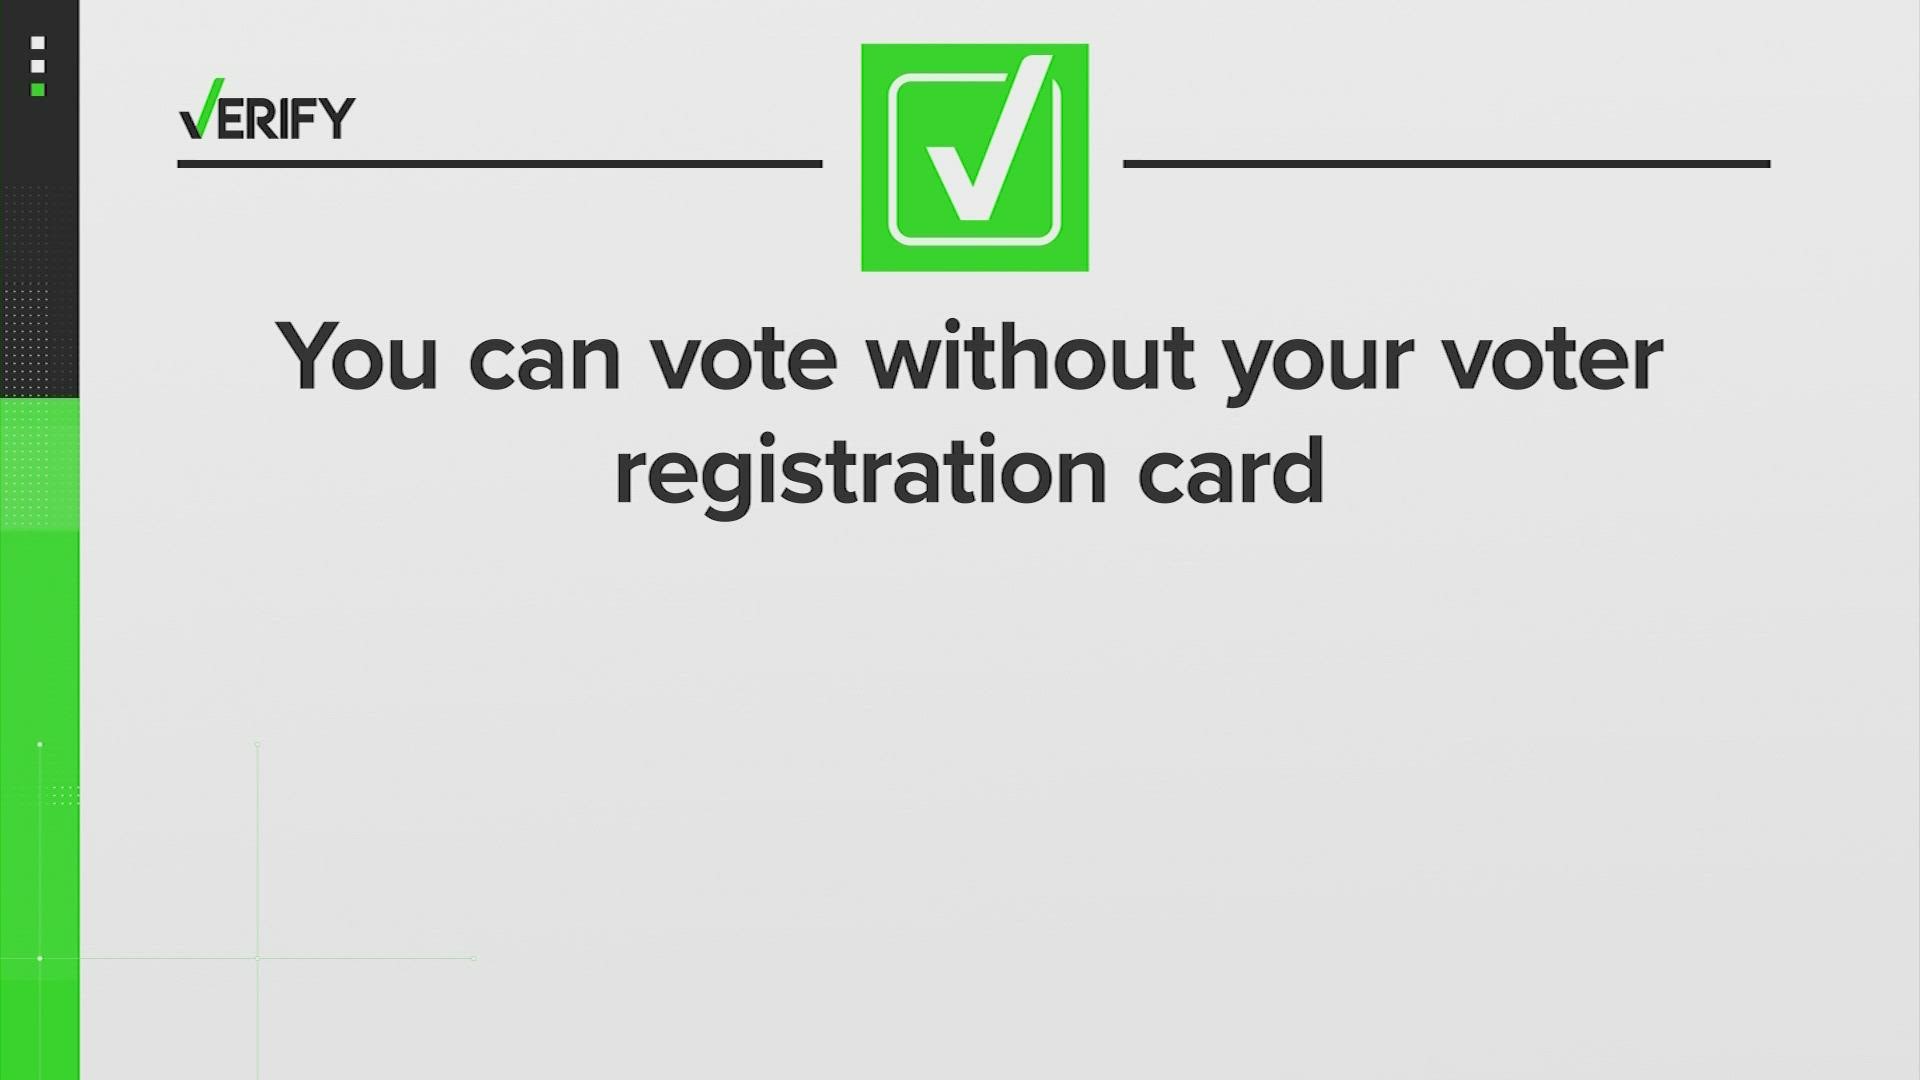 Several people have contacted KHOU 11 News concerned about being able to vote since they haven't received their voter registration cards in the mail.